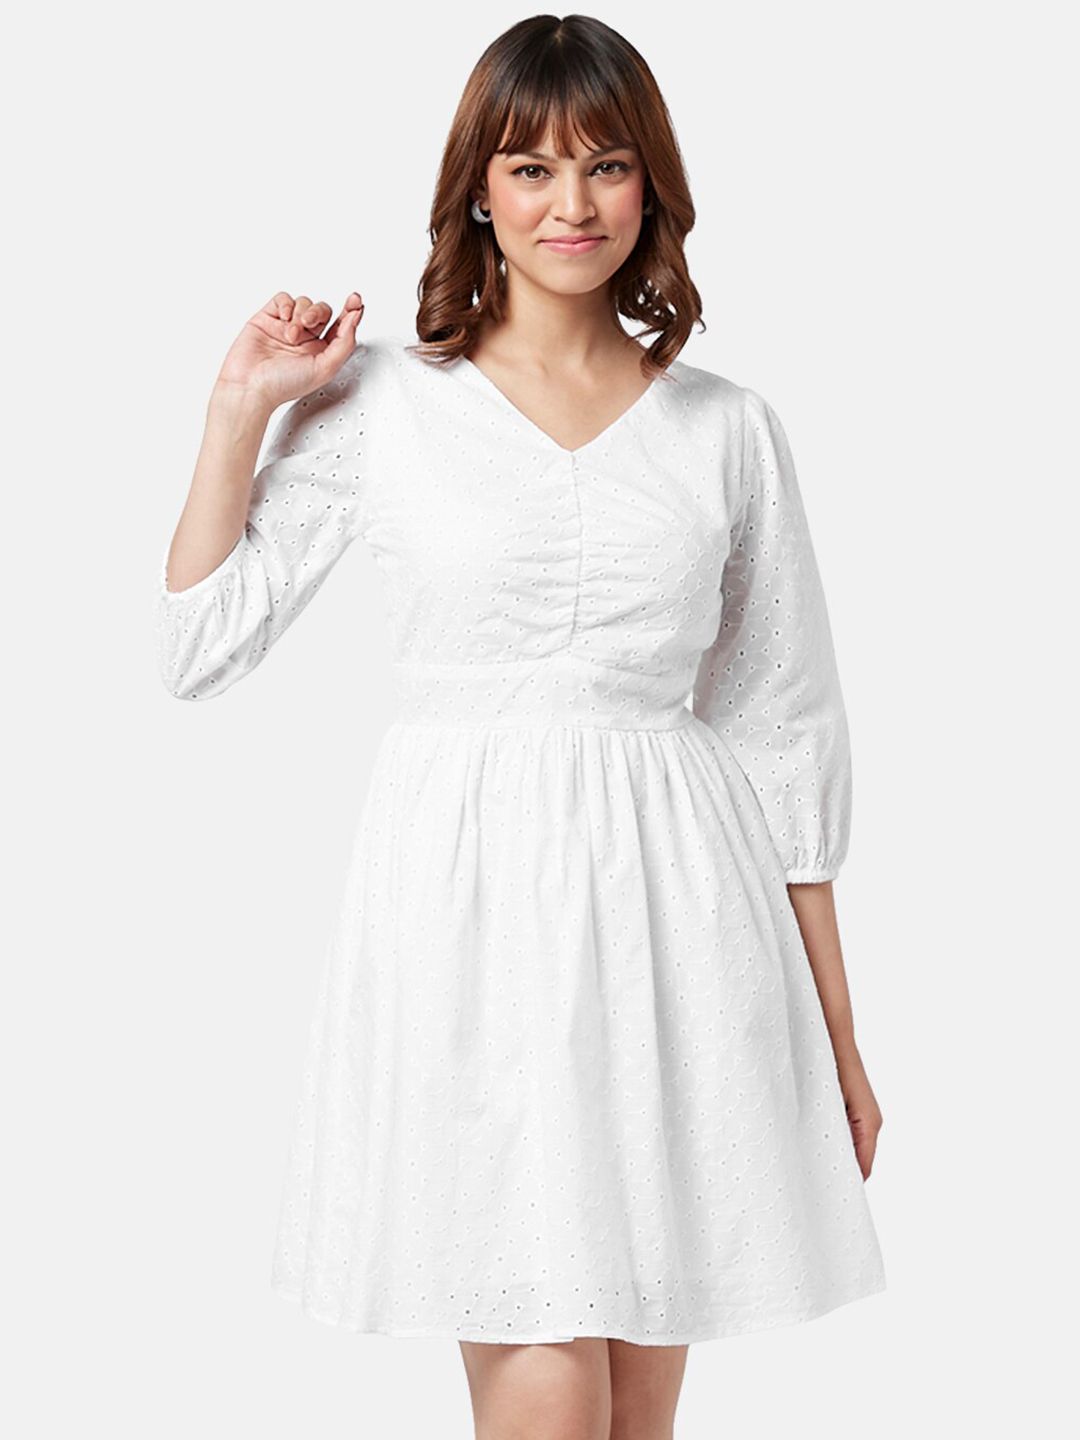 YU by Pantaloons White Fit & Flare Dress Price in India